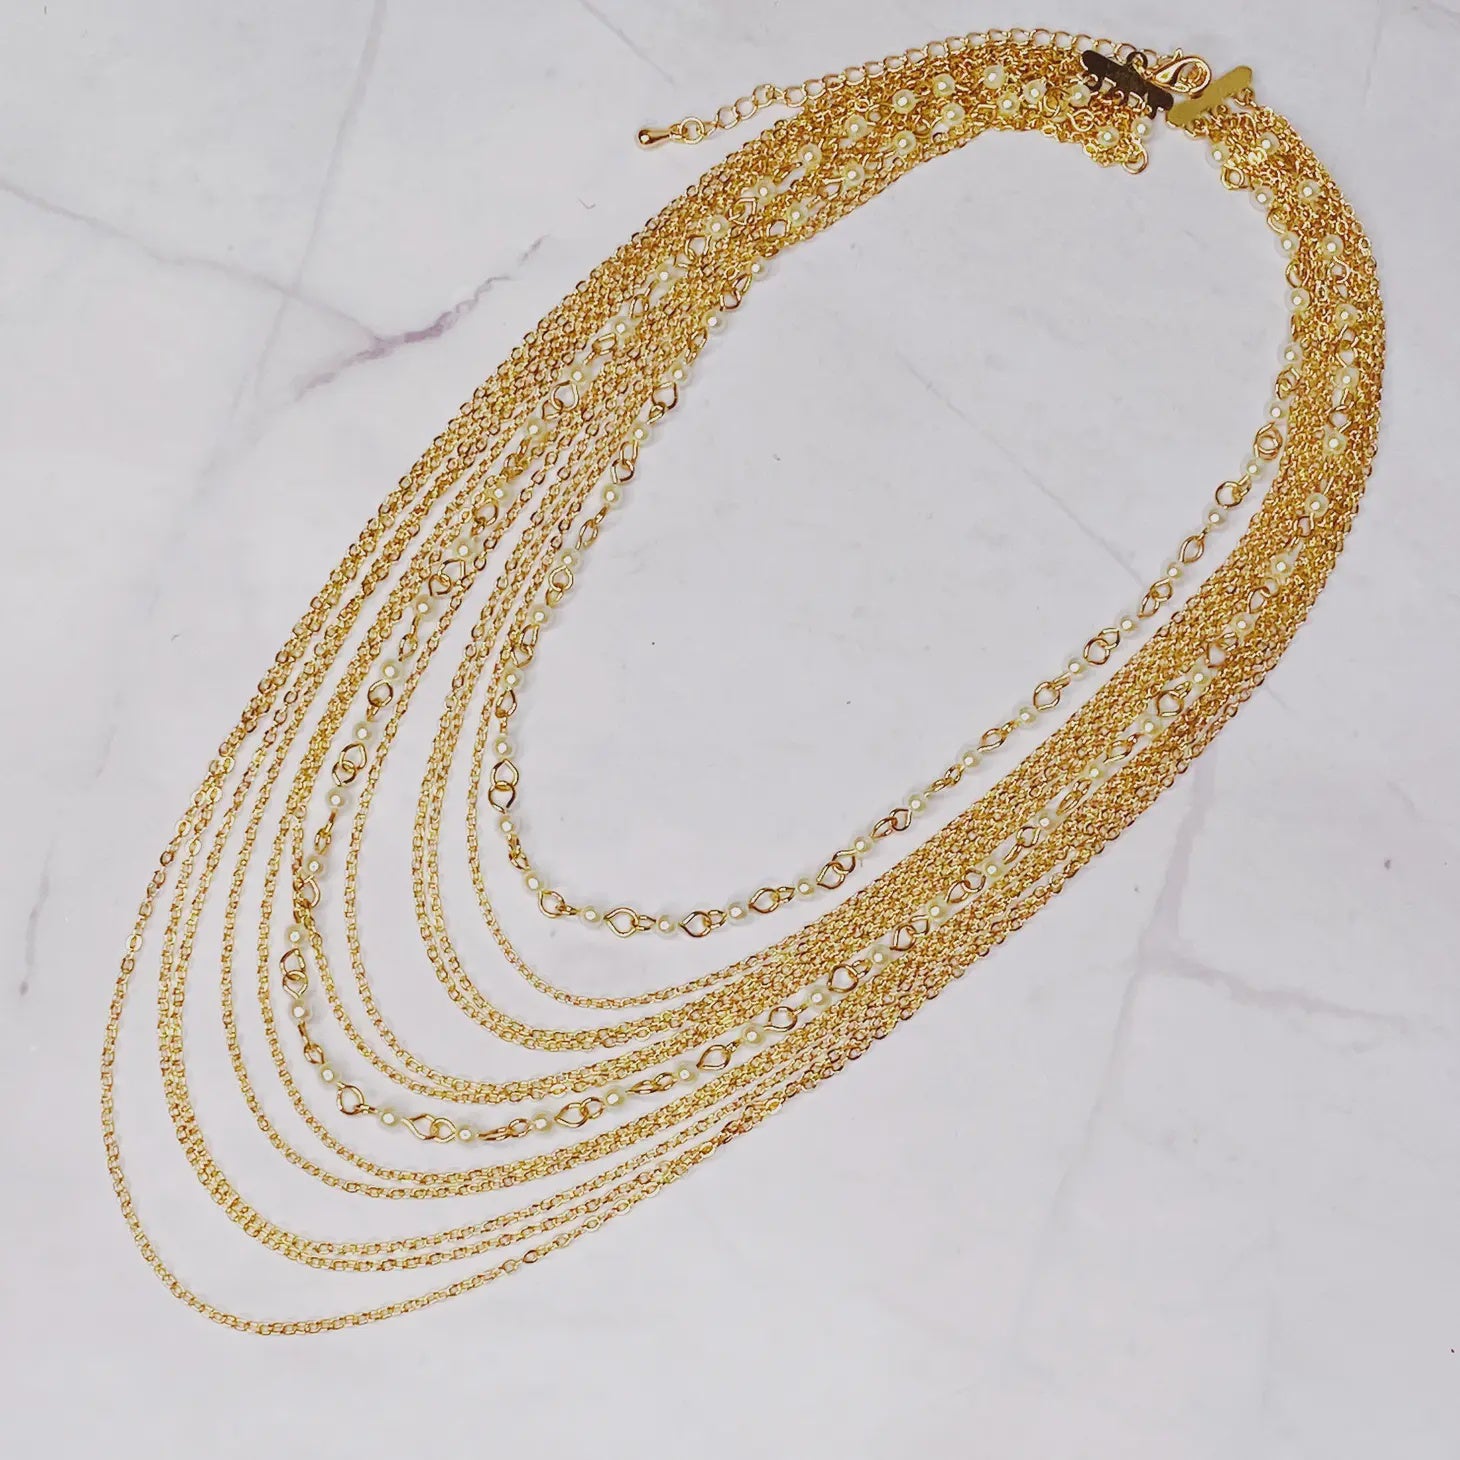 Draping Pearl and Chain Necklace